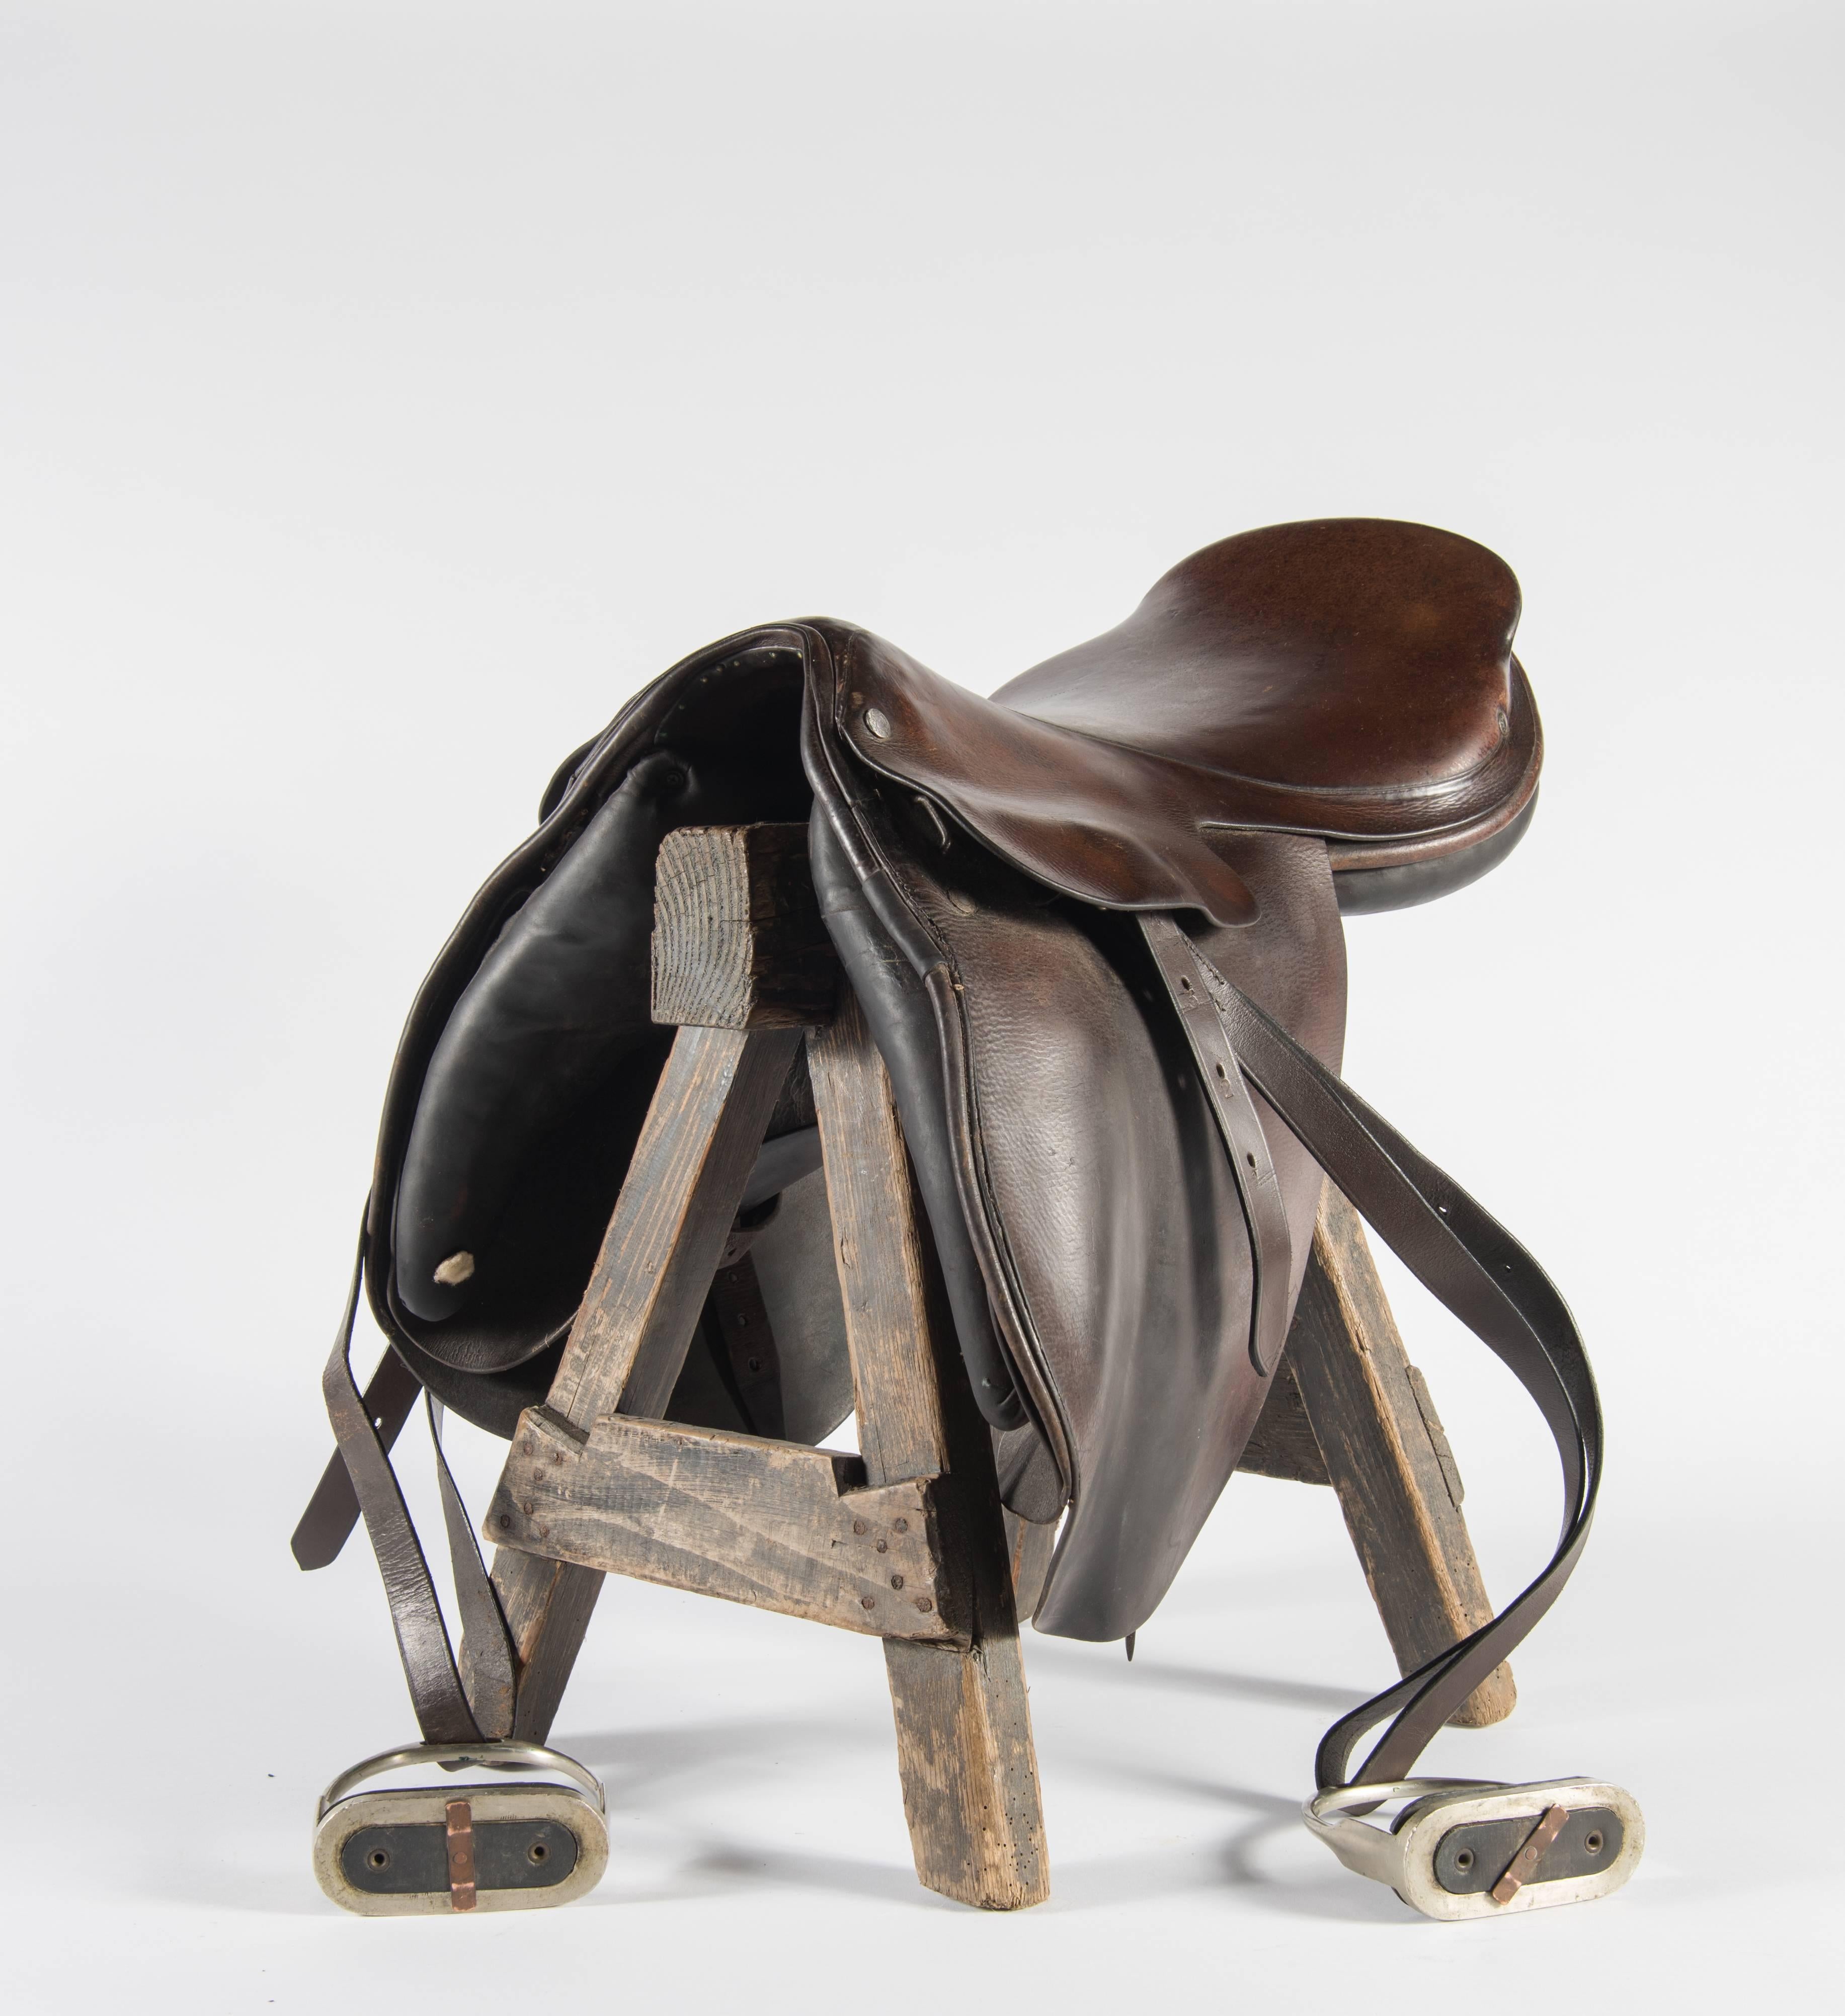 A vintage Hermès saddle from France. The leather shows use but is still in good condition on this handmade piece. With the Hermes name stamped on small metal brads, this piece speaks for itself.